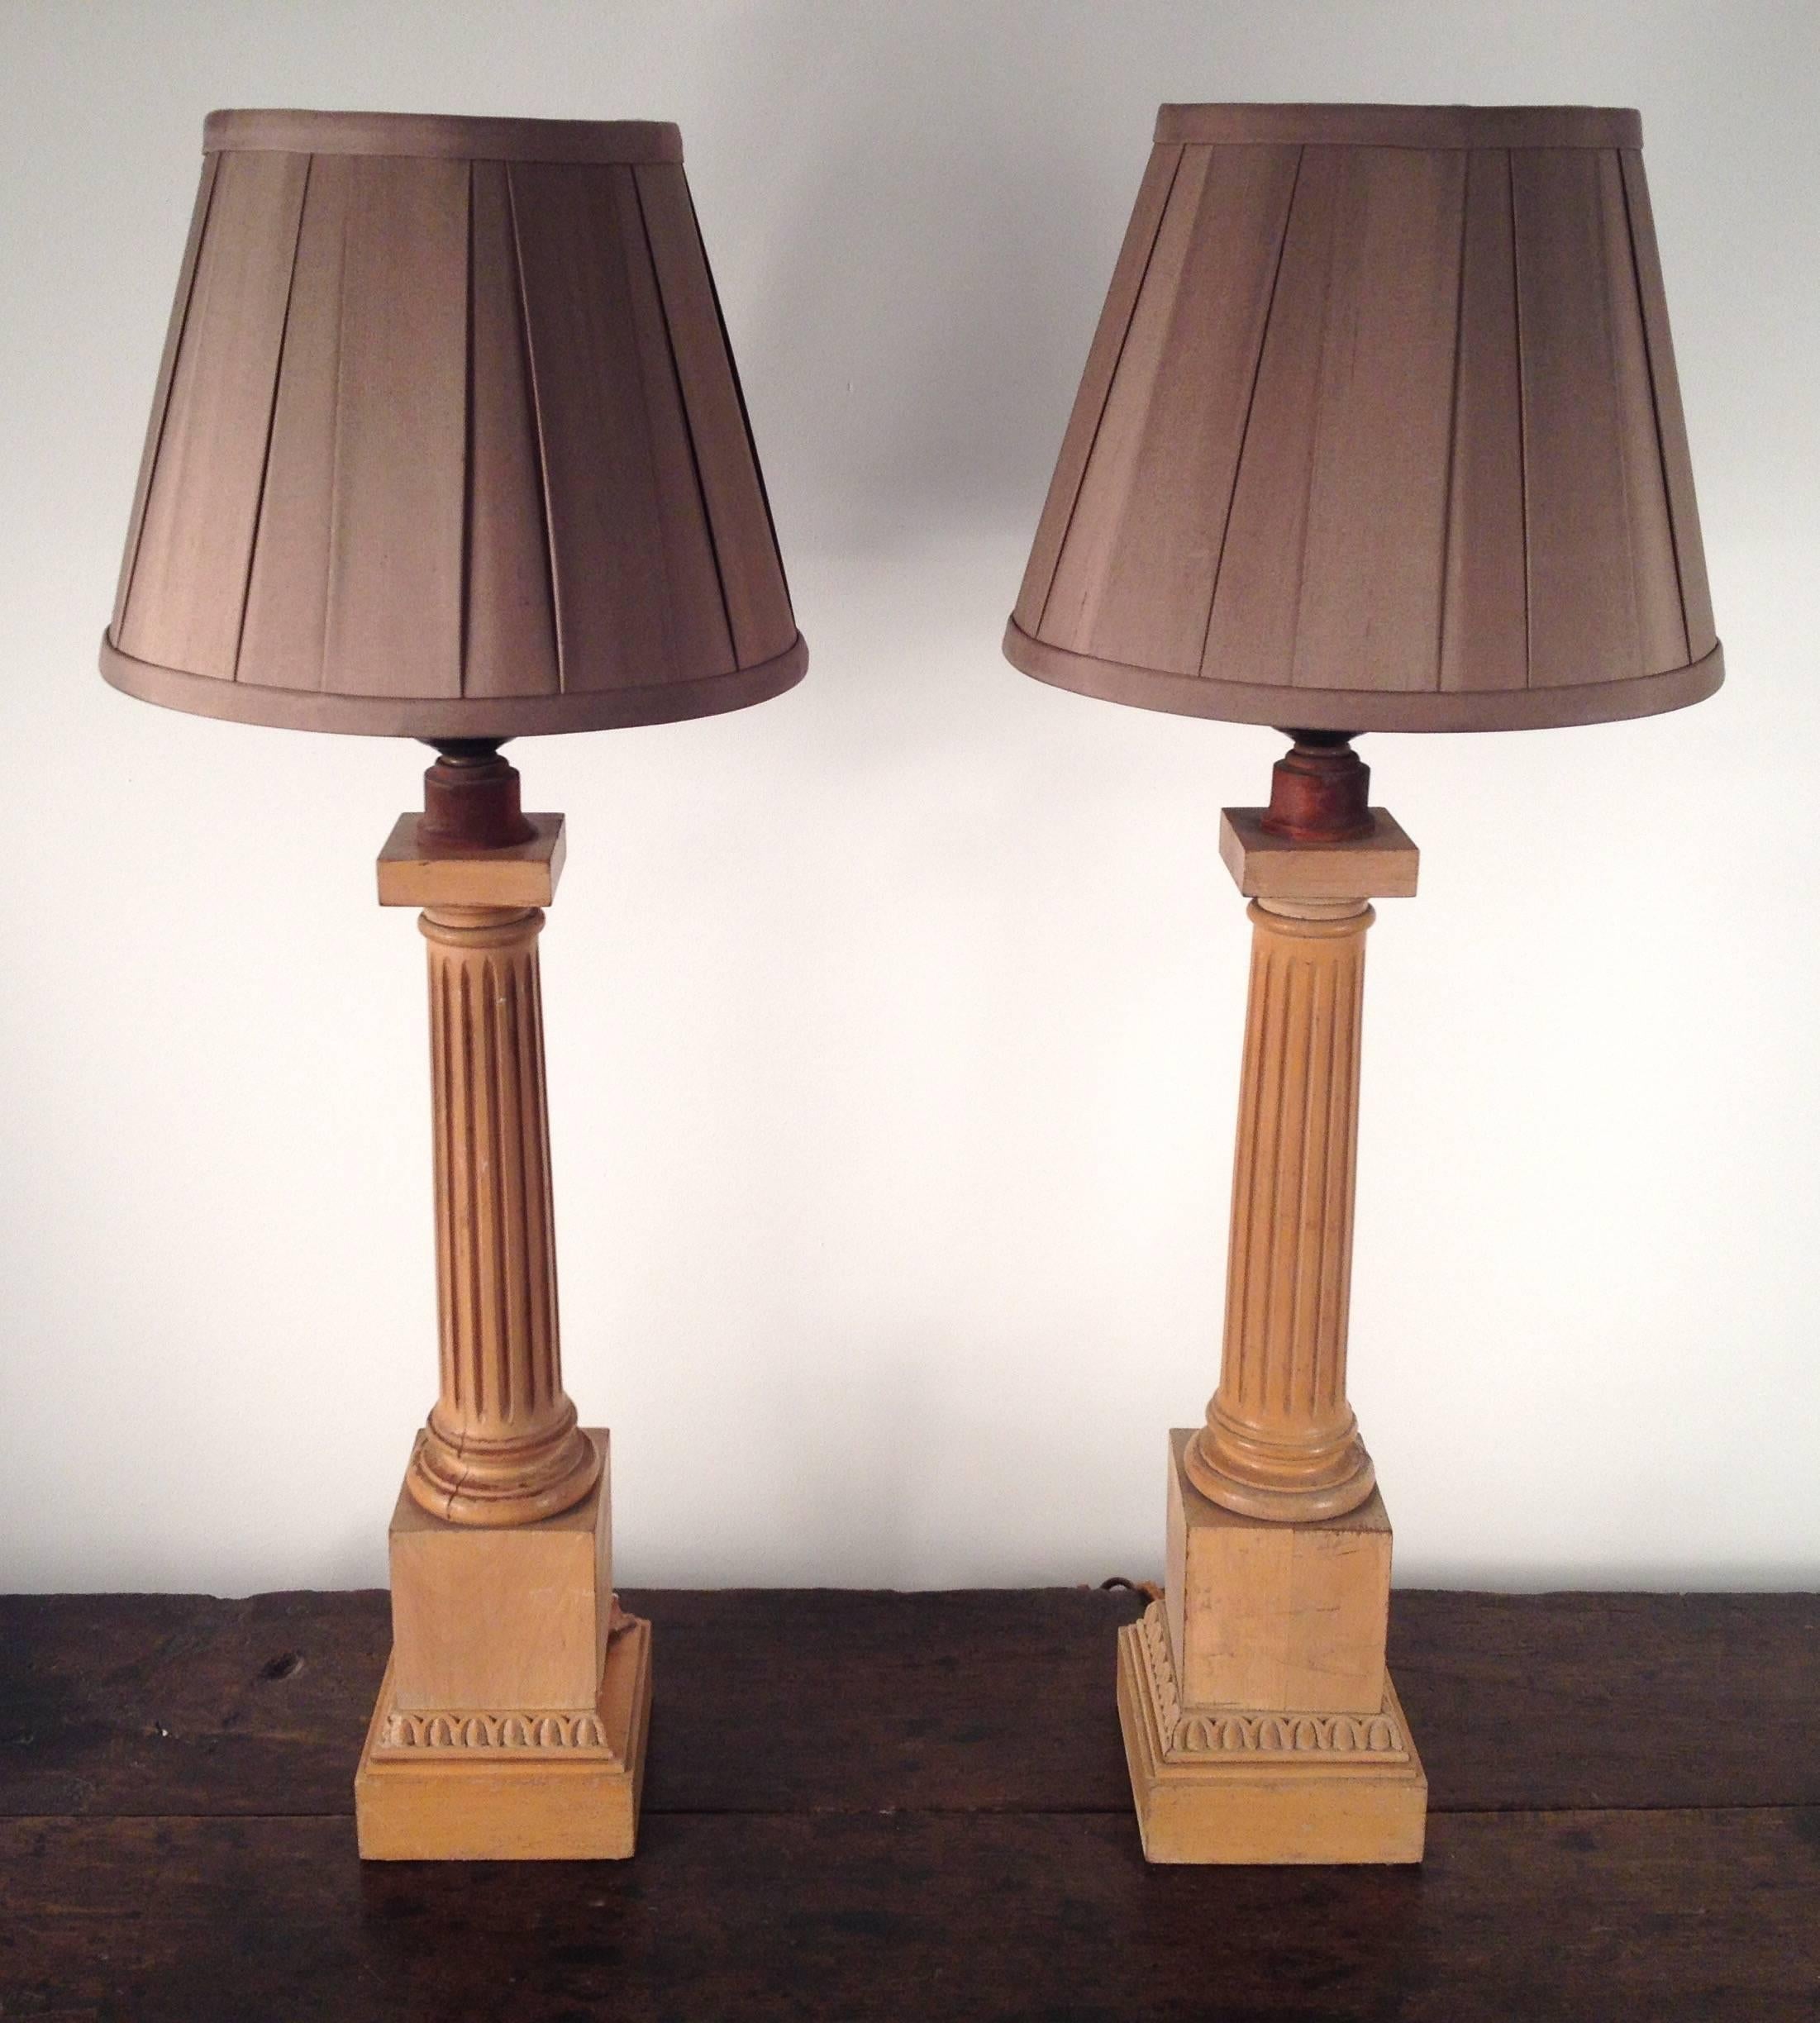 Pair of wood fluted column lamps, original brass hardware, porcelain mogul sockets. Lamps are 24